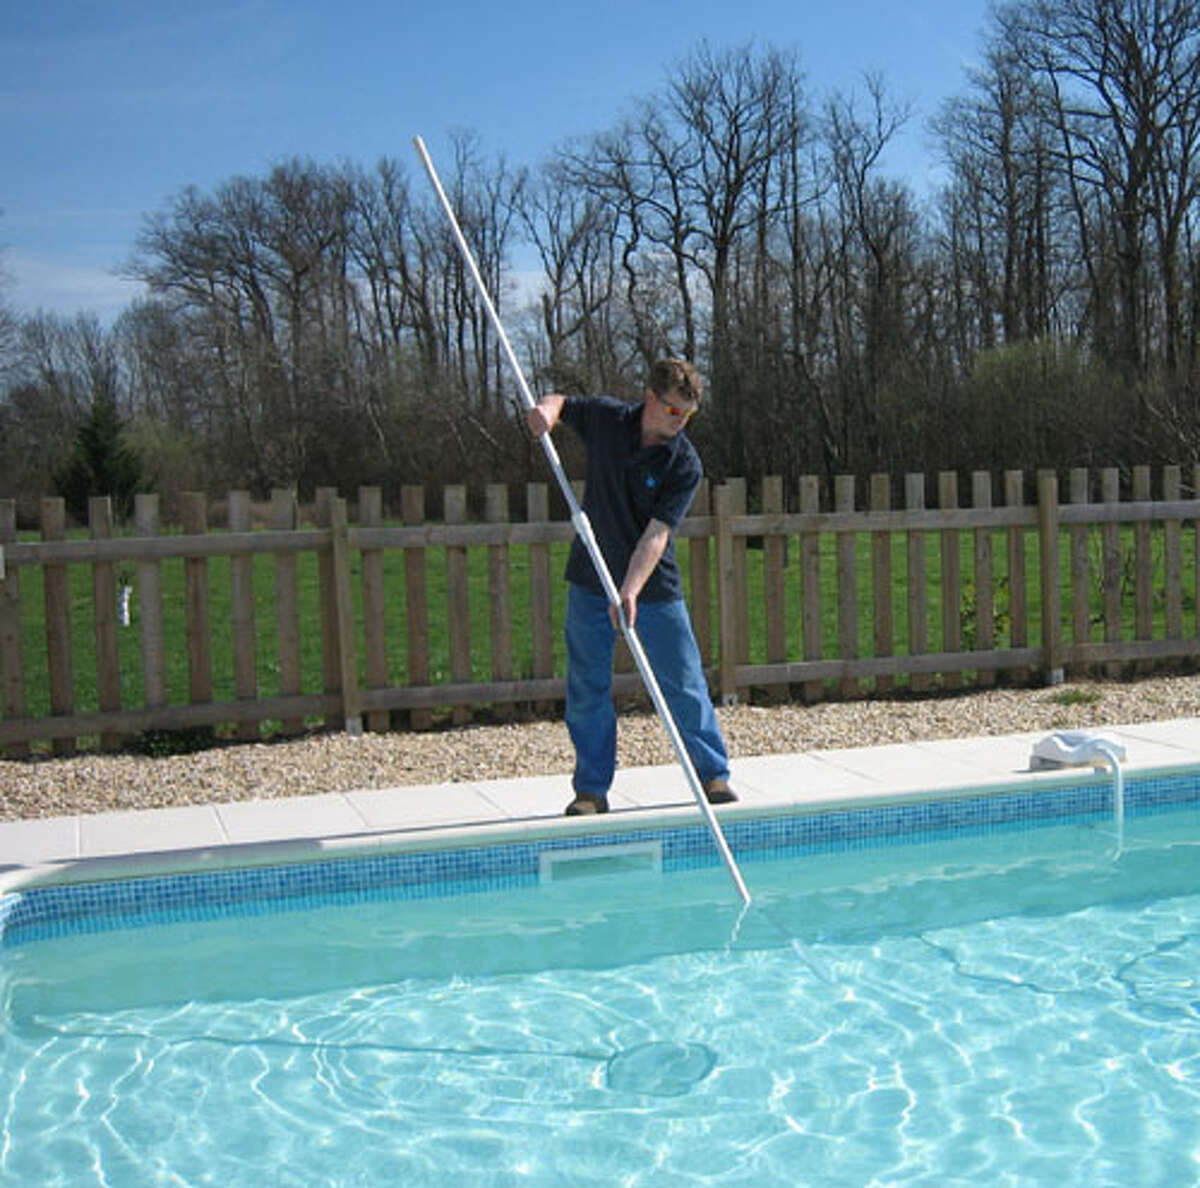 In theory it seems like a good idea since cleaning the pool is dad's job but who wants to make him work on his special day?